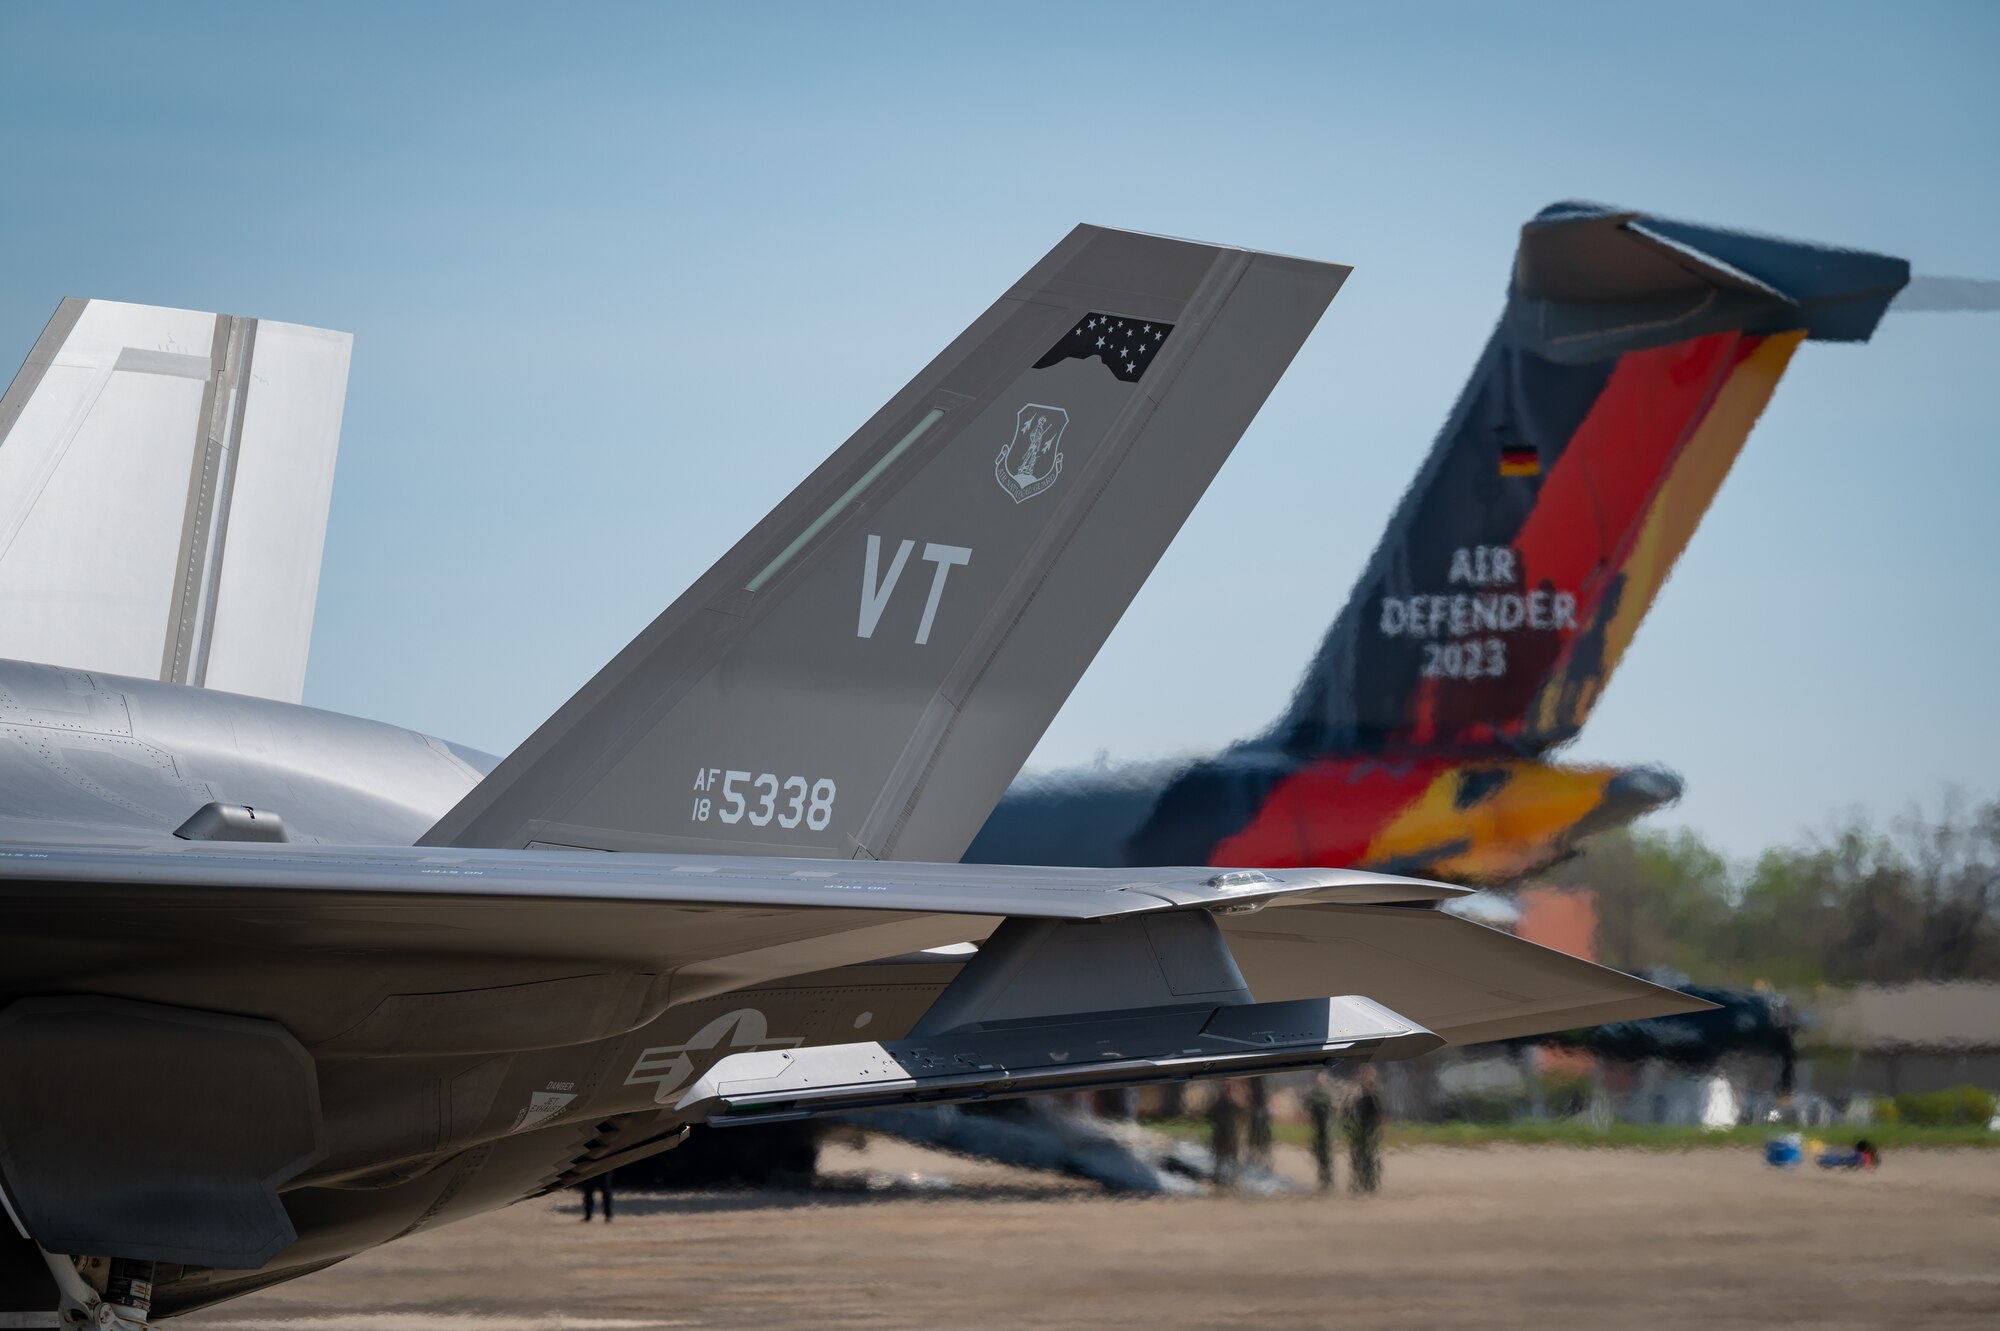 A F-35A Lightning II assigned to the 158th Fighter Wing, Vermont National Guard, taxis by a German Air Force Airbus A400M-180 painted with Air Defender 2023 decals during a media event highlighting Air Defender 2023 on the flight line at Joint Base Andrews, Maryland, April 5, 2023.